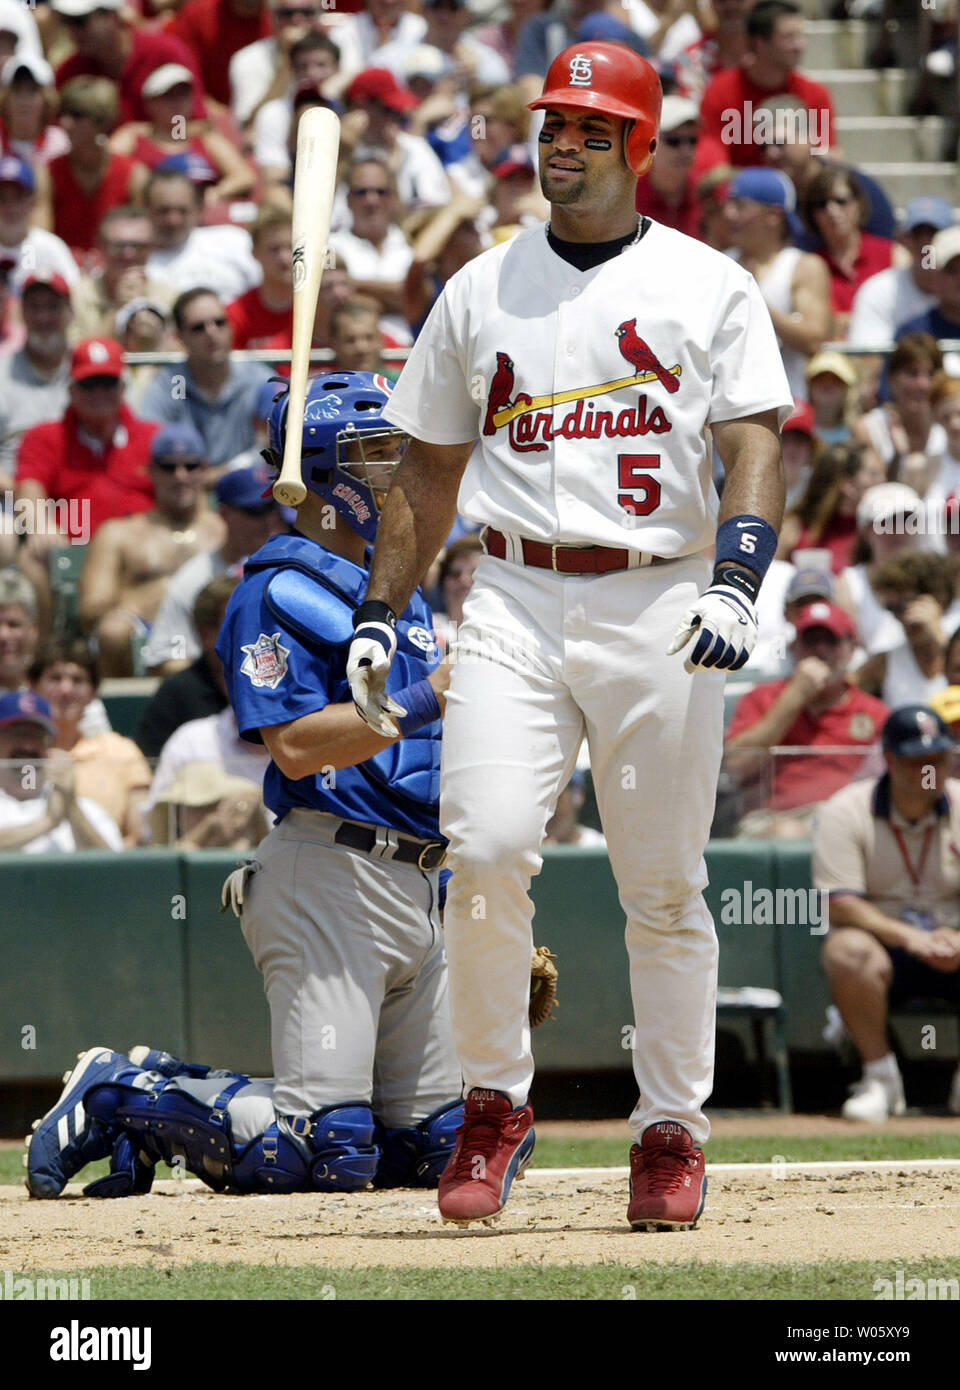 https://c8.alamy.com/comp/W05XY9/st-louis-cardinals-albert-pujols-flips-his-bat-in-disgust-after-striking-out-in-the-first-inning-against-the-chicago-cubs-at-busch-stadium-in-st-louis-on-july-10-2004-pujols-failed-to-reach-base-for-the-first-time-in-20-games-upi-photobill-greenblatt-W05XY9.jpg